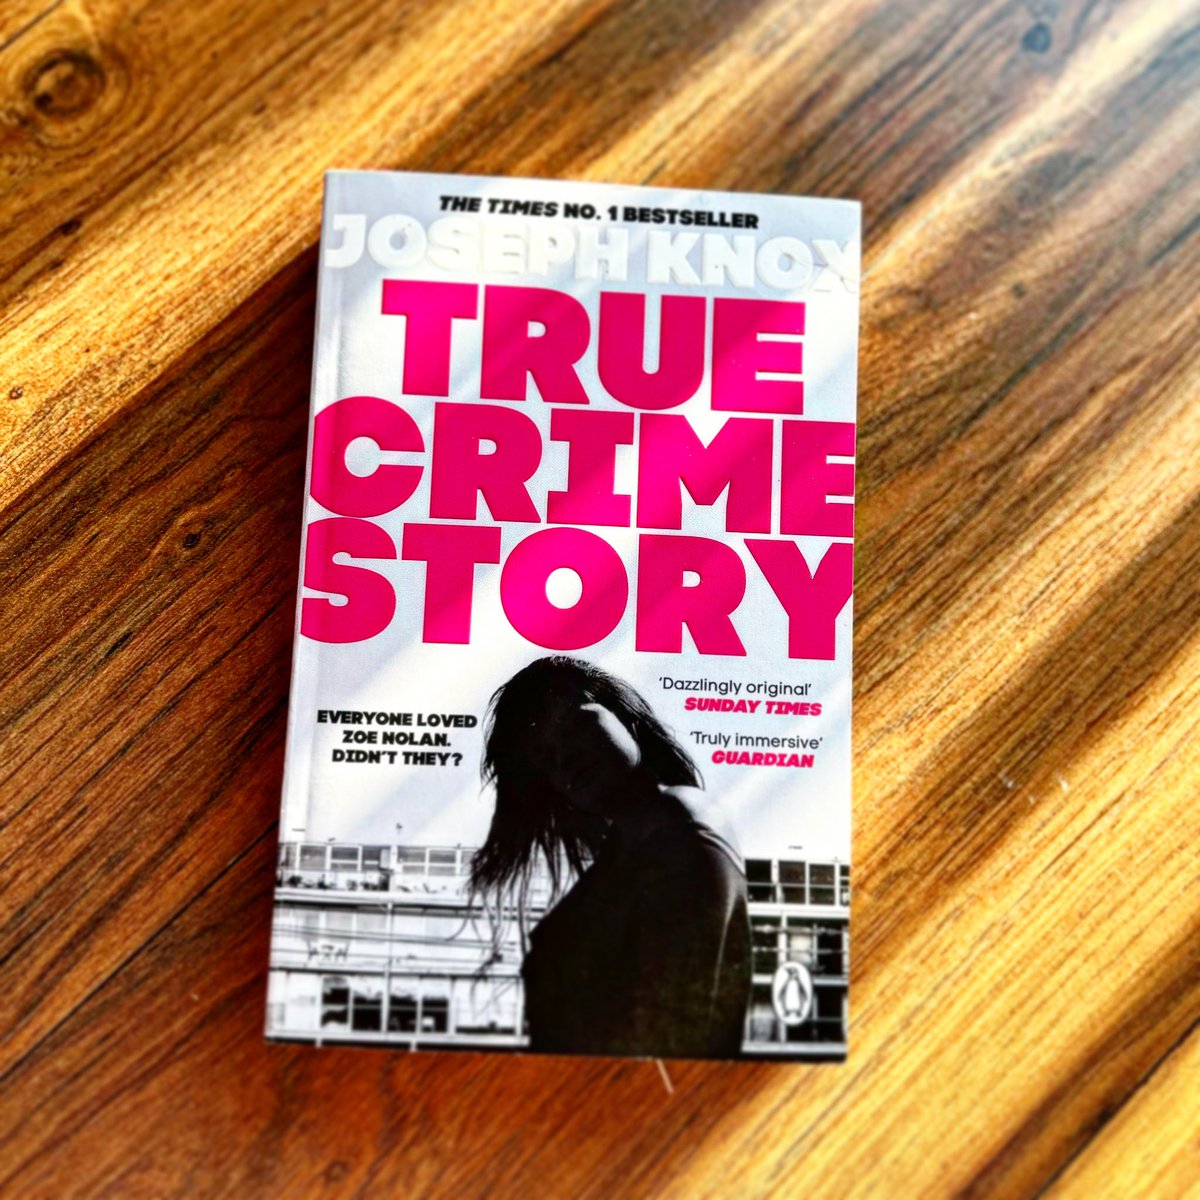 True Crime Story by Joseph Knox
⭐️⭐️⭐️

✨Mini Review✨coming soon!

#bookreview #bookstagram #bookstagrammer #booksbooksbooks #bookrecommendations #bookreviewer #bookreviewersofinstagram #bookrecs #bookreader #bookrec #josephknox #truecrimestory